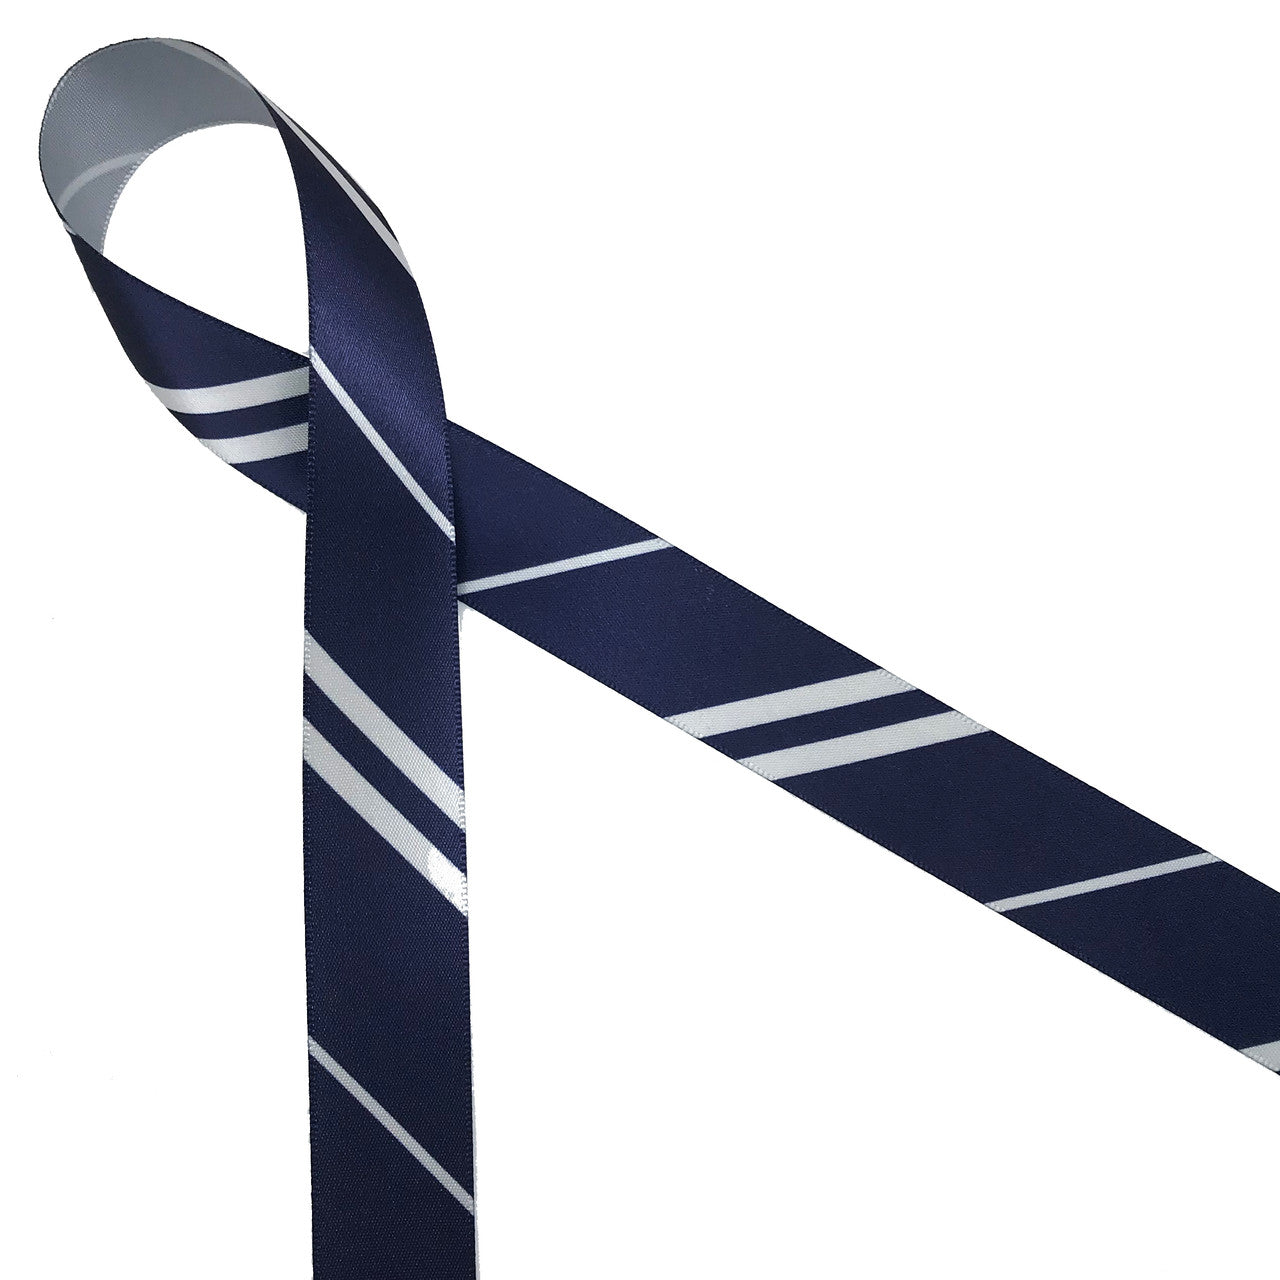 Wide and narrow stripes of gray and navy blue printed on 7/8" gray single face satin ribbon is an ideal addition to any Hogwarts themed party! Designed and printed in the USA